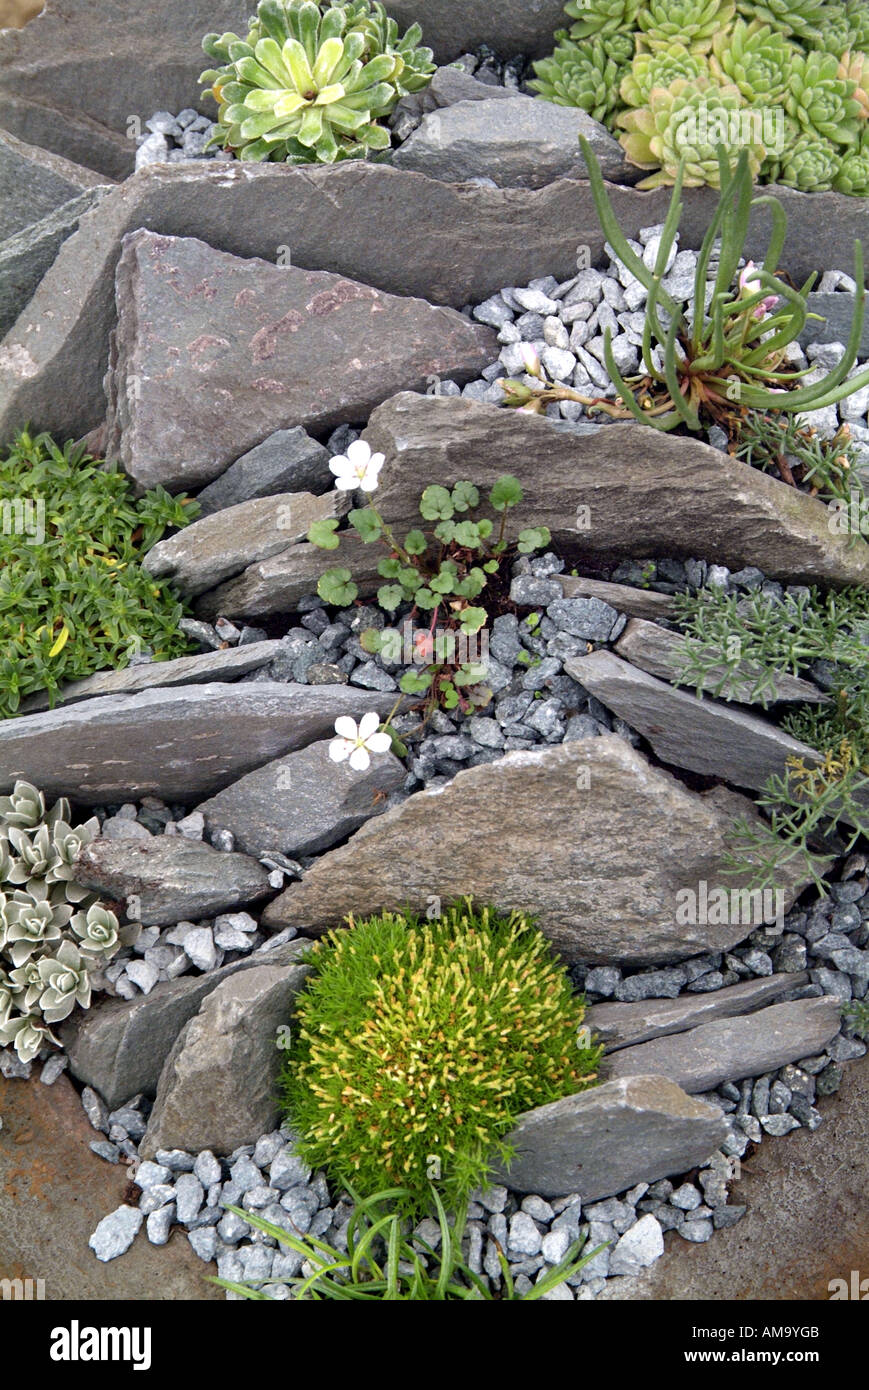 Alpine rock garden close up saxifrage early spring moss clump mound plant planting arrangement contrived Stock Photo